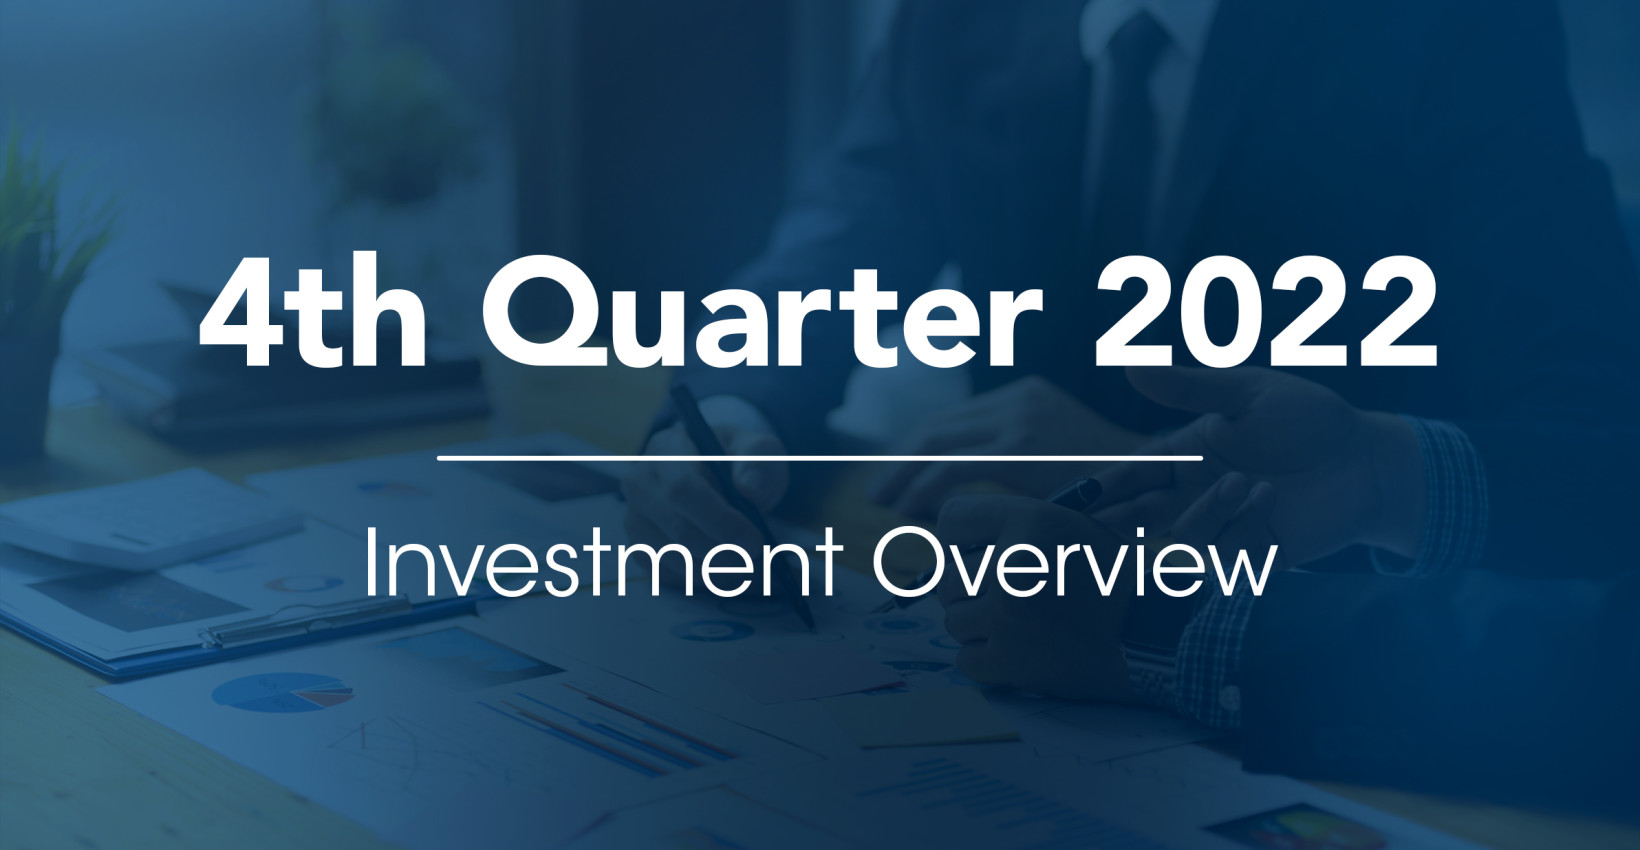 4th Quarter 2022 - Investment Overview